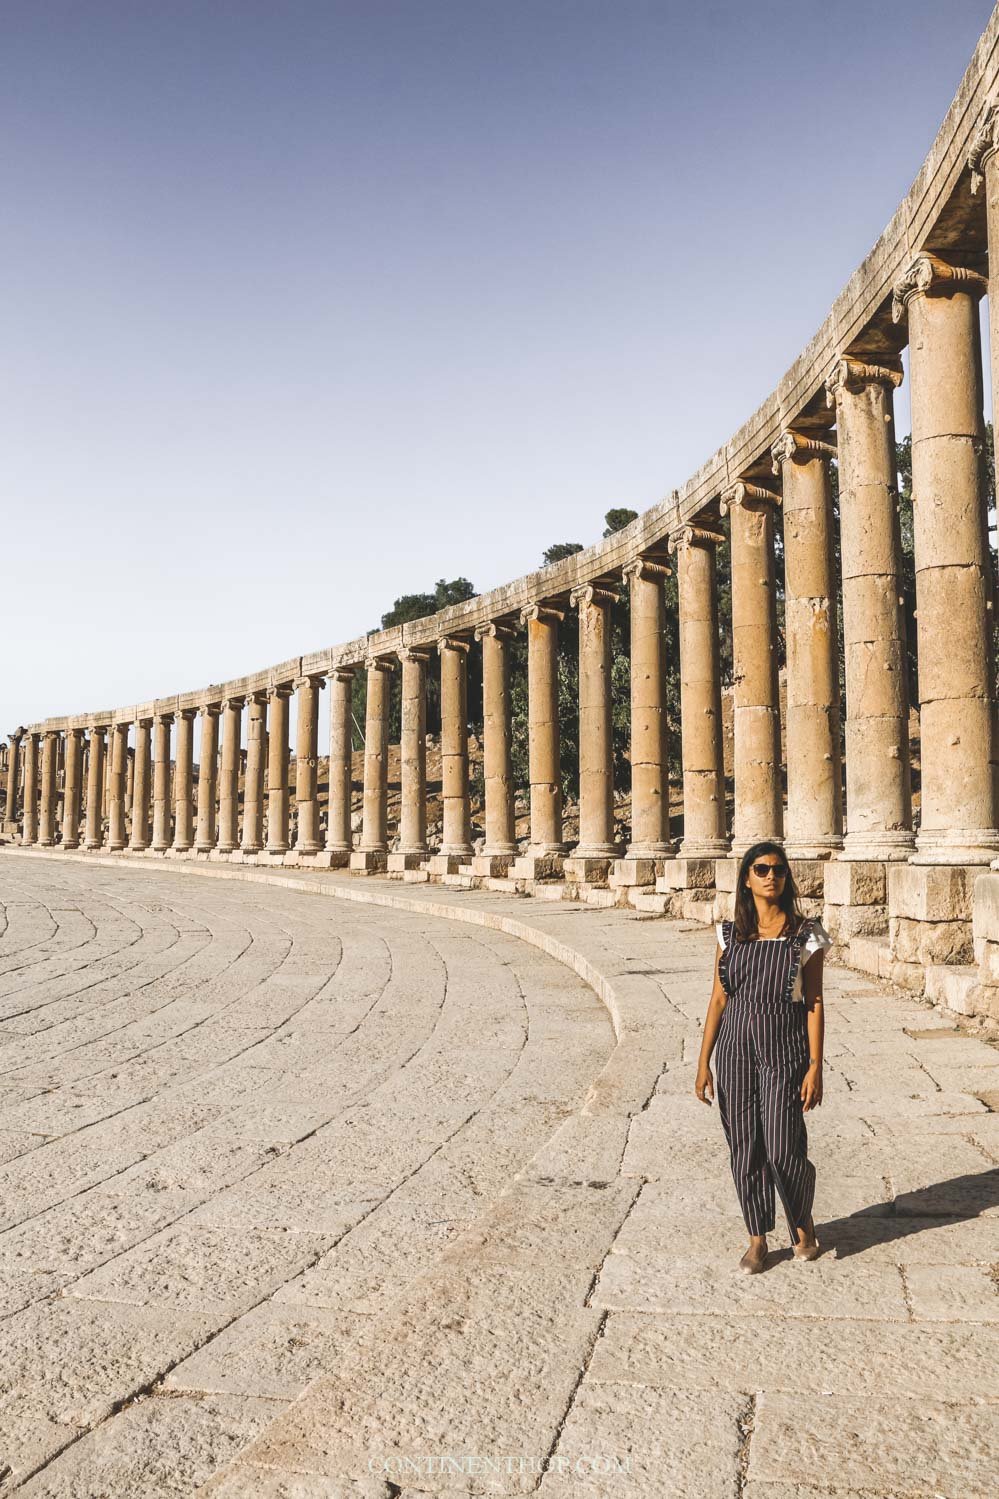 hada Independencia Clínica Jerash Ruins | Best Preserved Roman Ruins in Jordan + so much more! —  Continent Hop